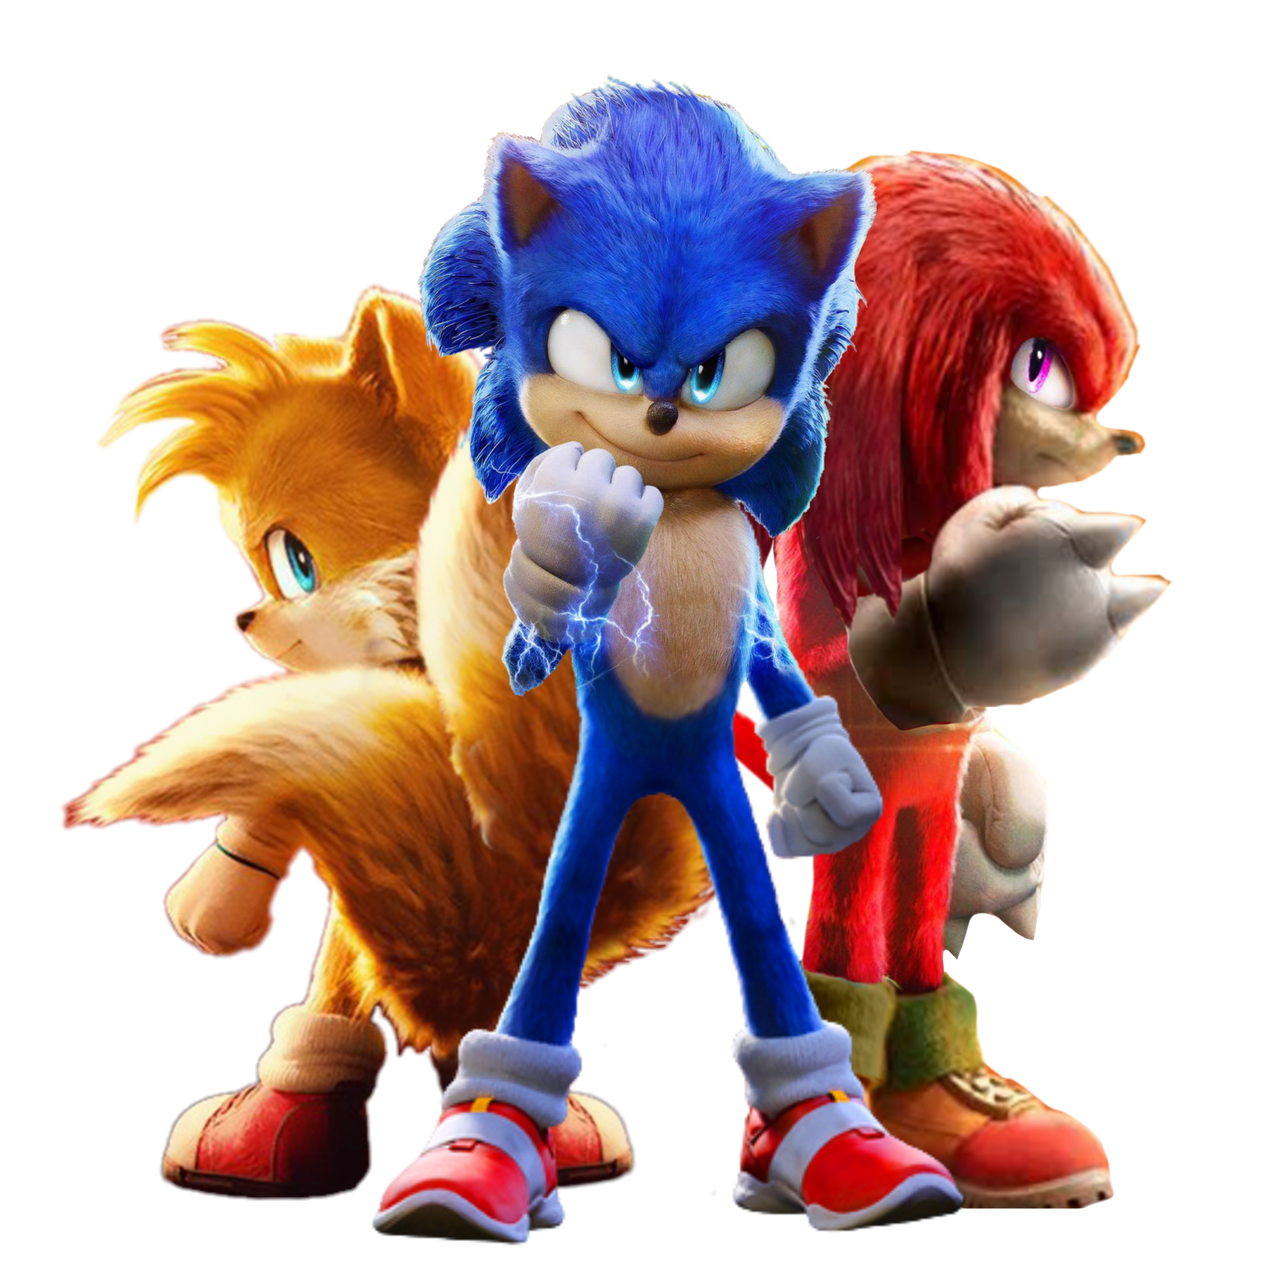 Sonic the hedgehog 3 (With knuckles) by jalonct on DeviantArt